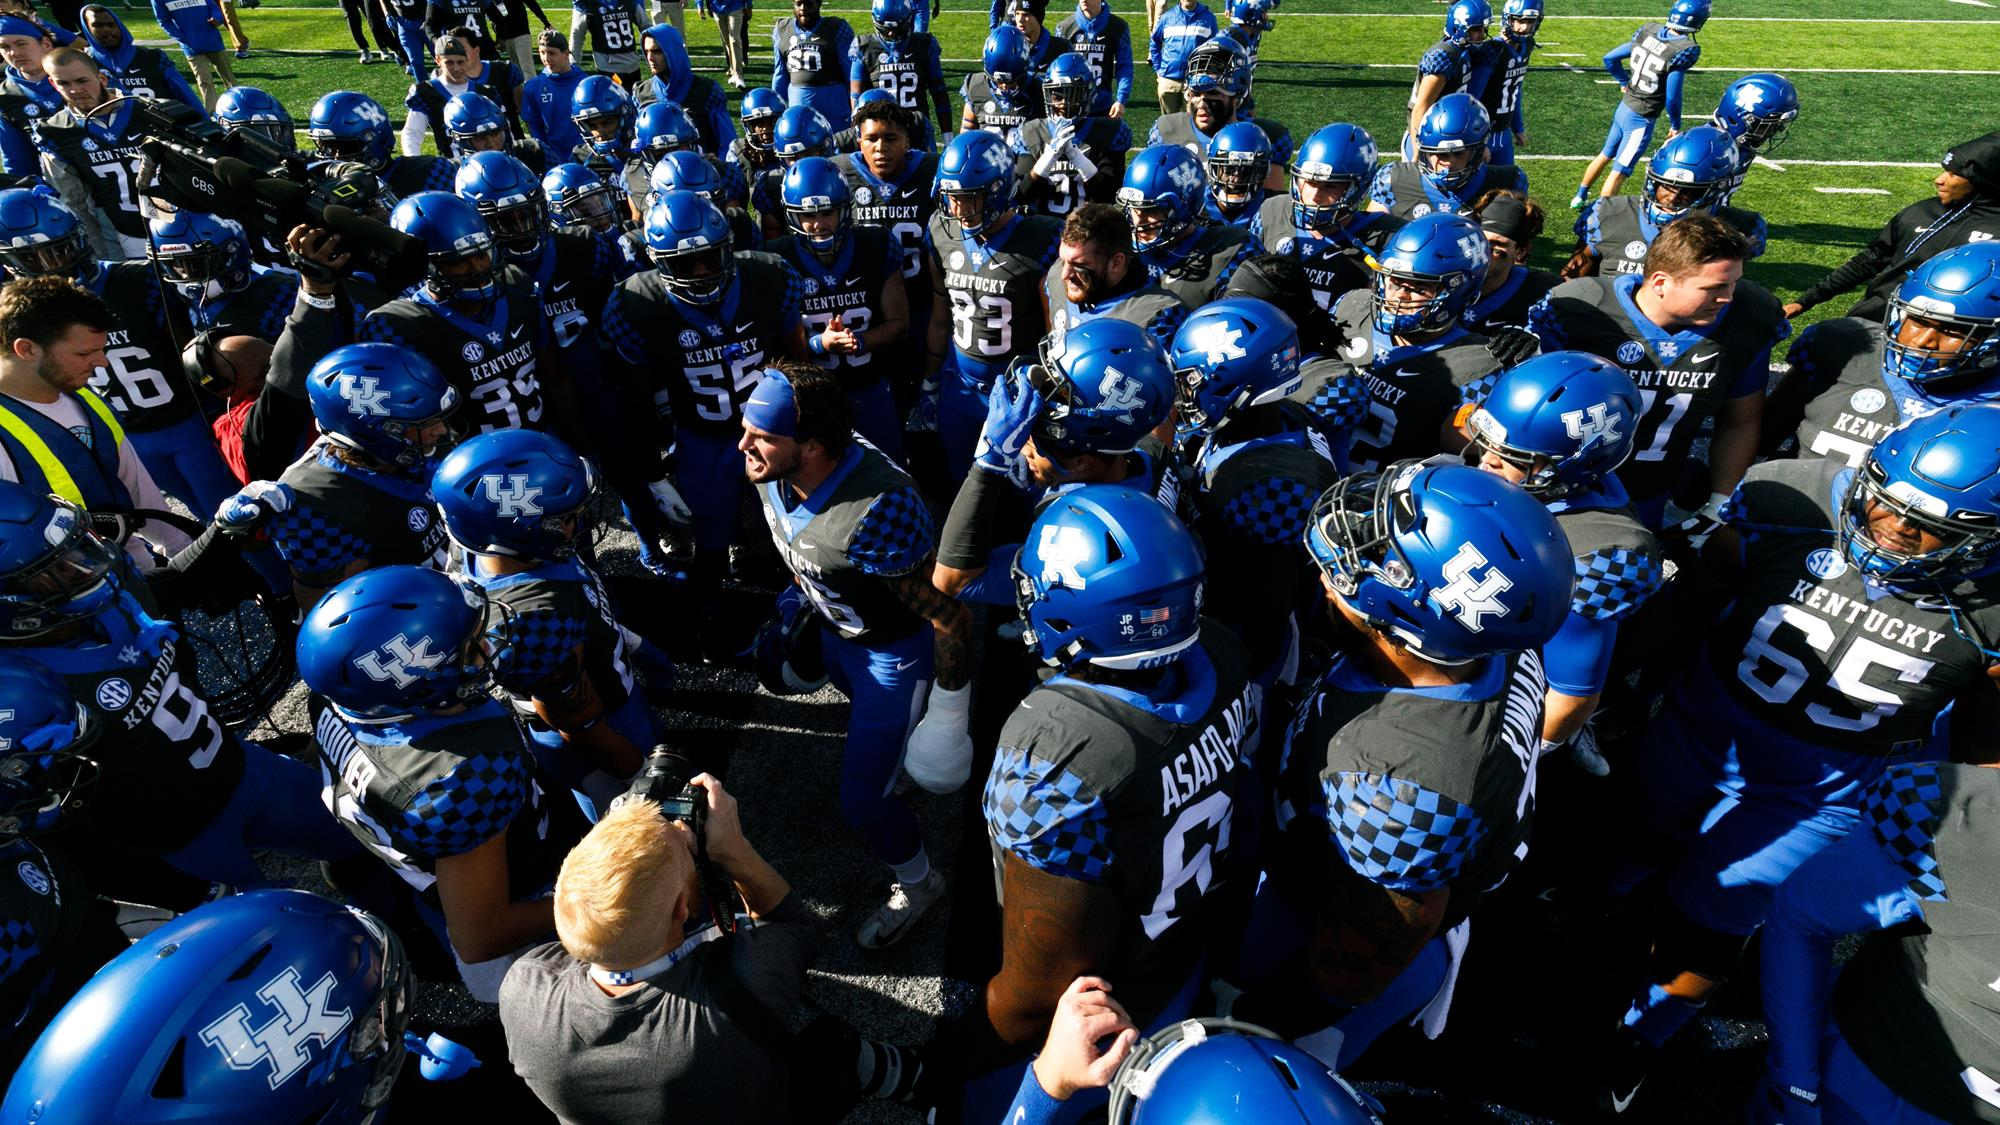 UK with No Need to Search for Motivation Heading to Tennessee